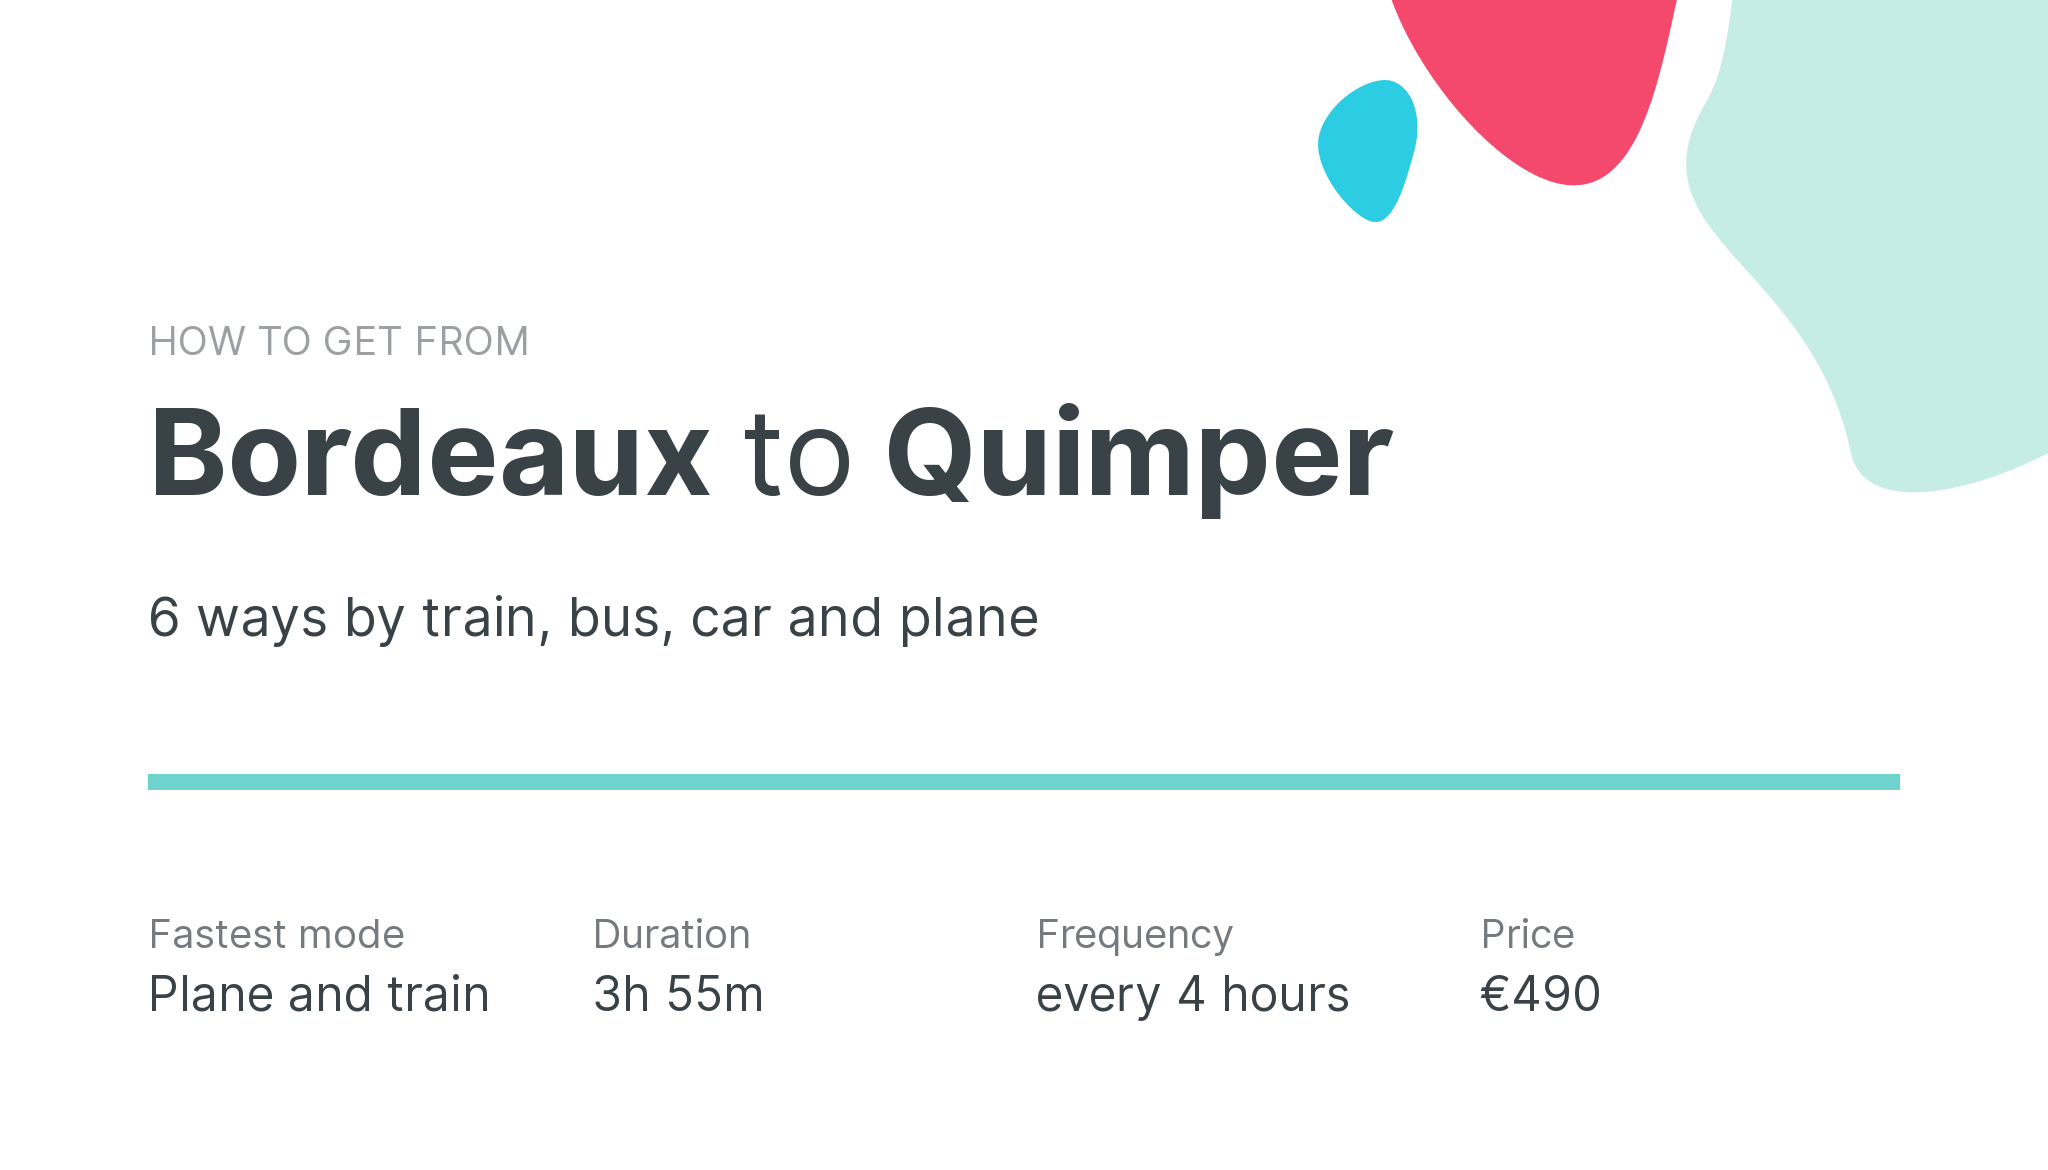 How do I get from Bordeaux to Quimper